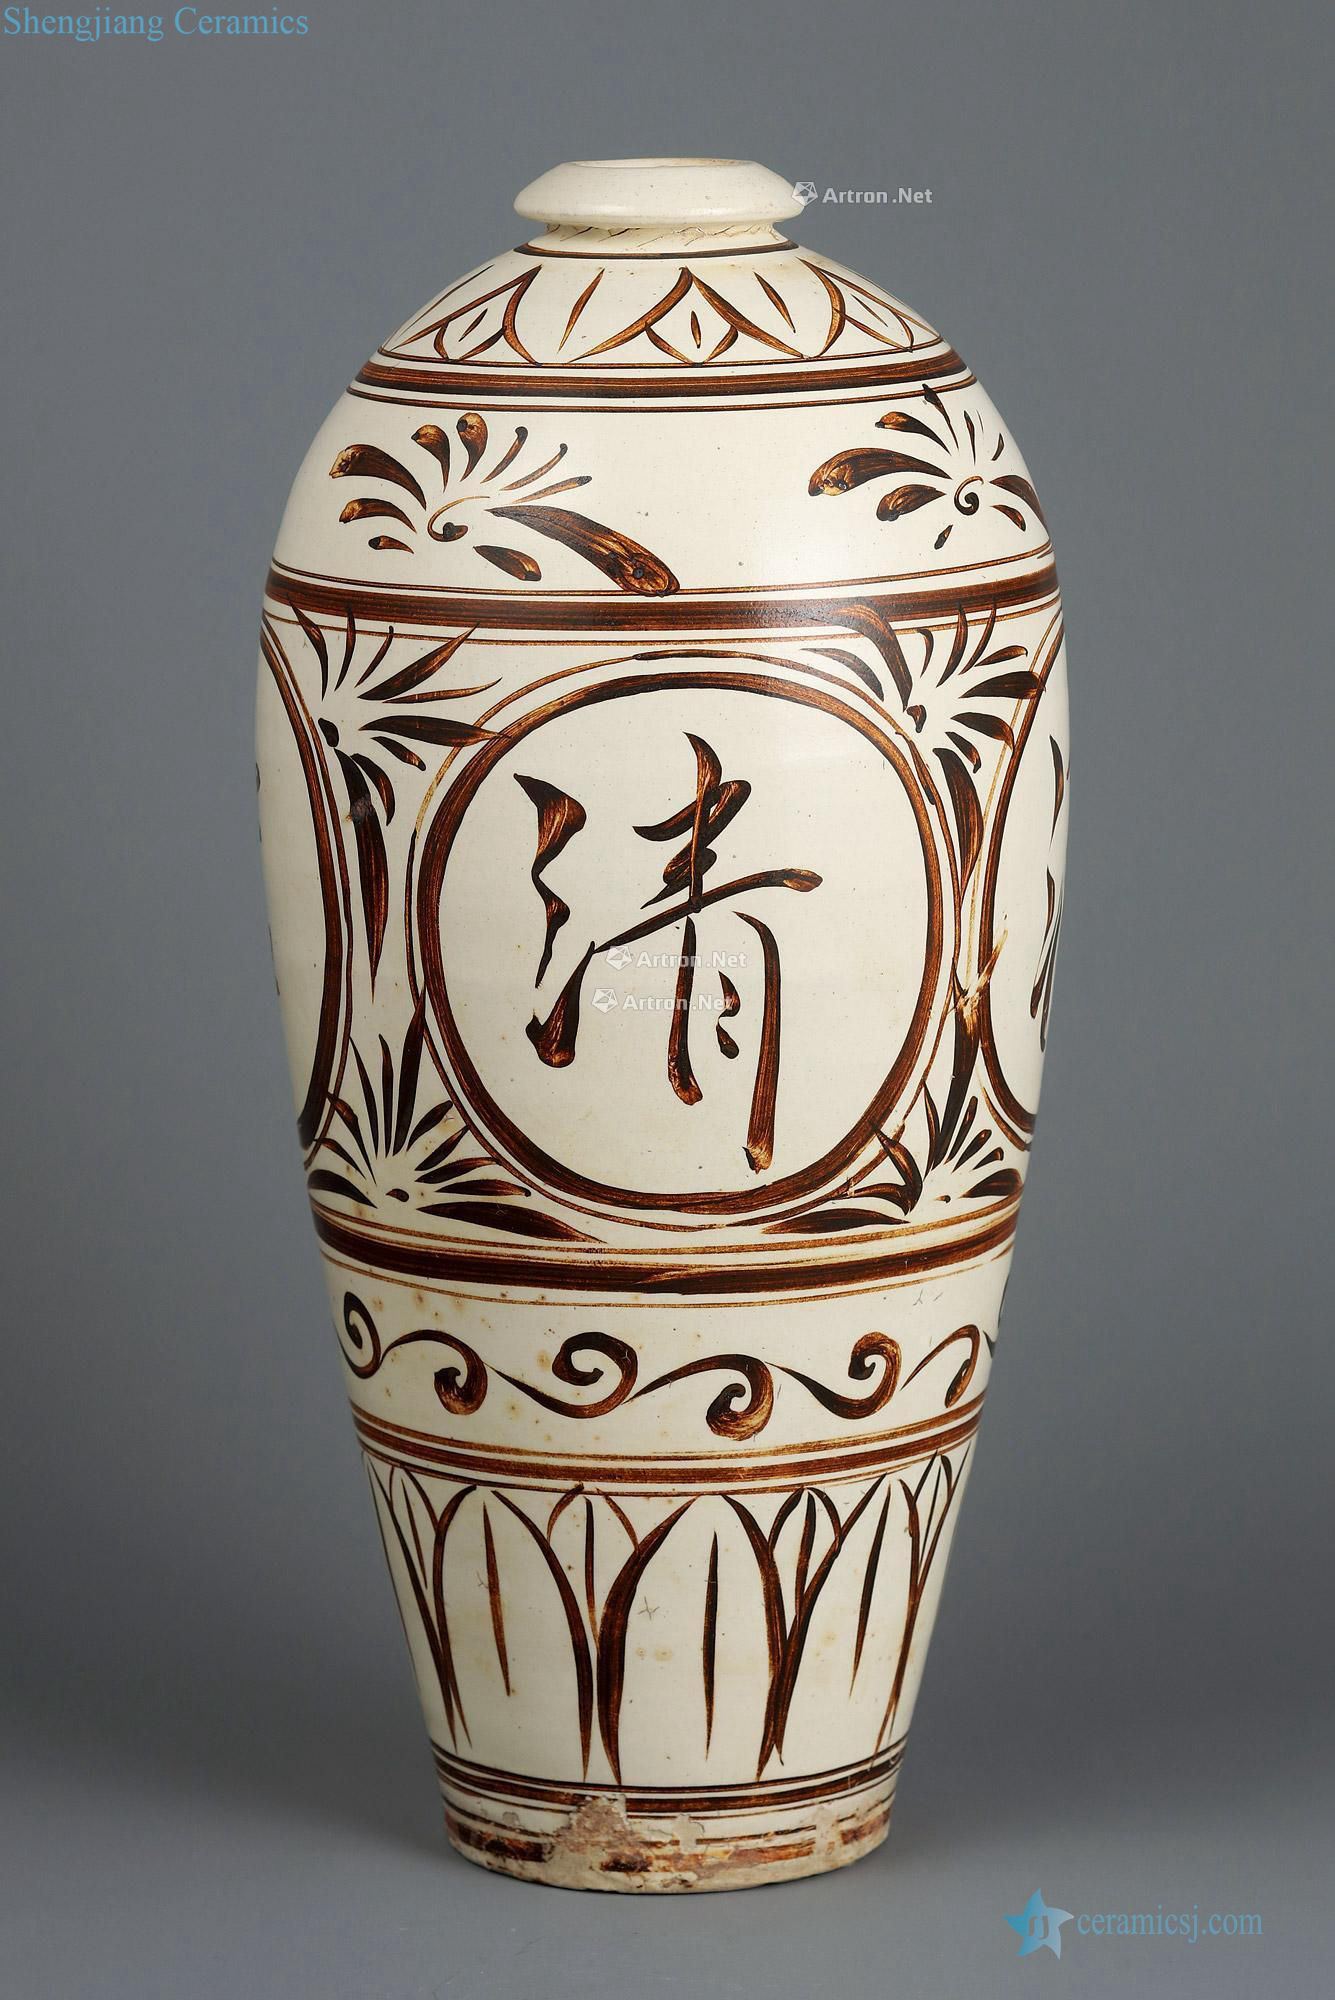 Northern song dynasty to gold Magnetic state kiln of coloured drawing or pattern grain mei bottles of wine "cleaning"